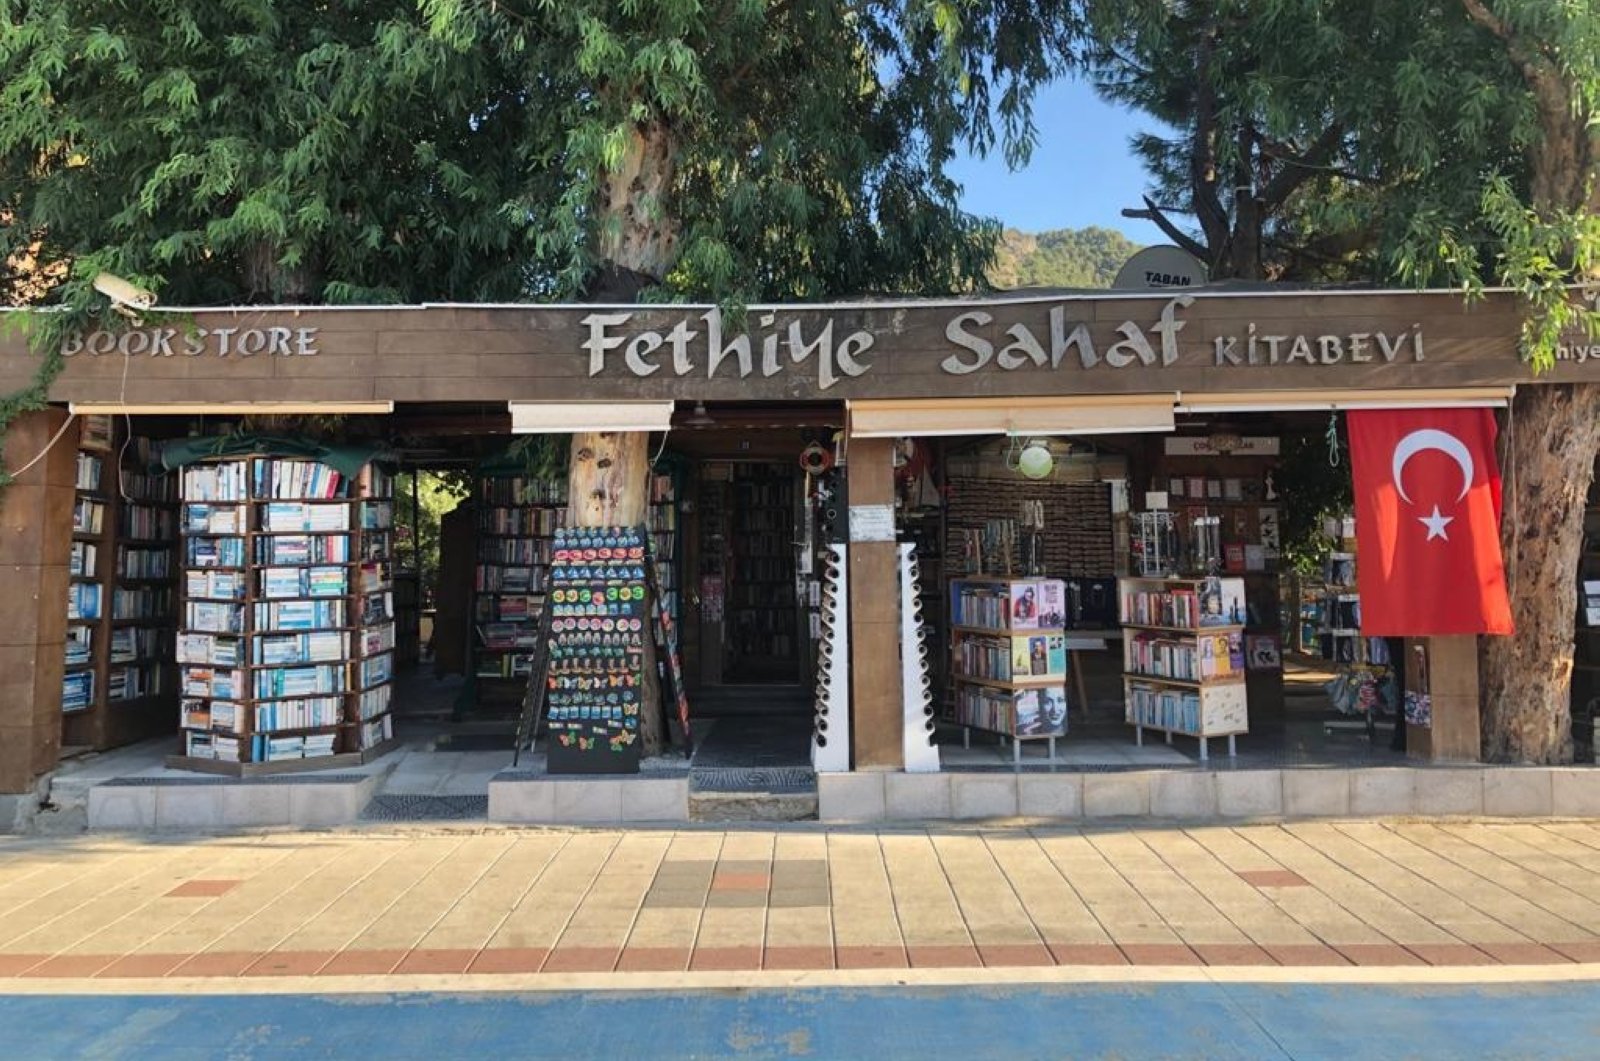 The exterior of Fethiye Sahaf reflects the sunny, coastal and free-spirited nature of the region. (Photo by Matt Hanson)